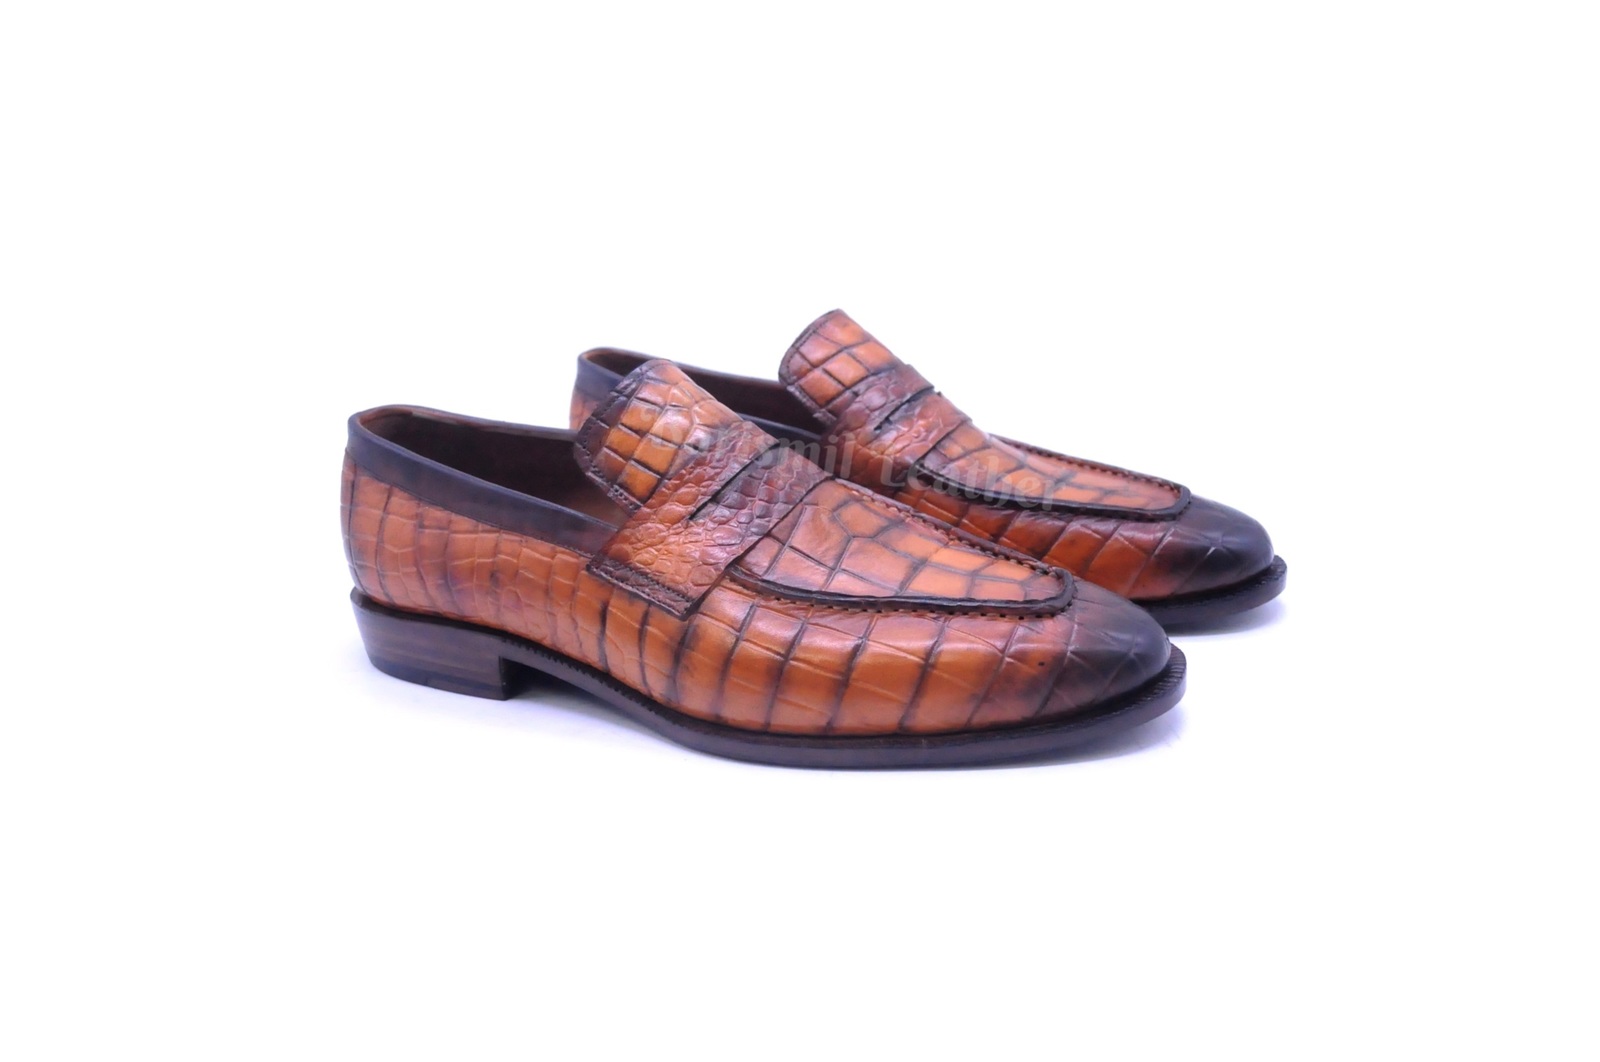 men croc handmade leather hand patina loafers shoes leather dress shoes for men